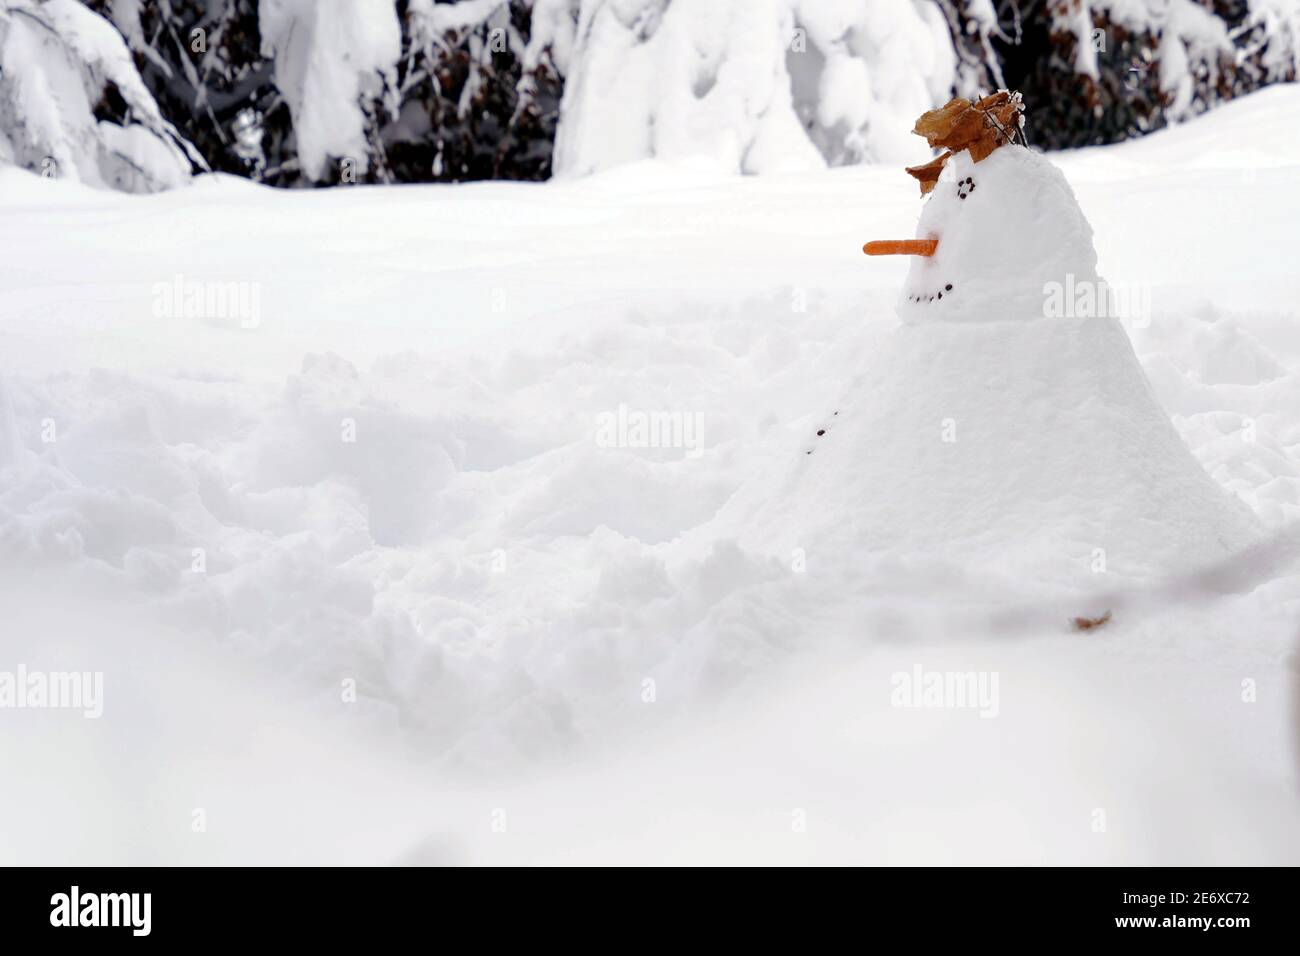 Snowman build in a garden covered with snow. It has nose made of carrot,  face of black buttons and a hat of dry leaves. Copy space. Stock Photo